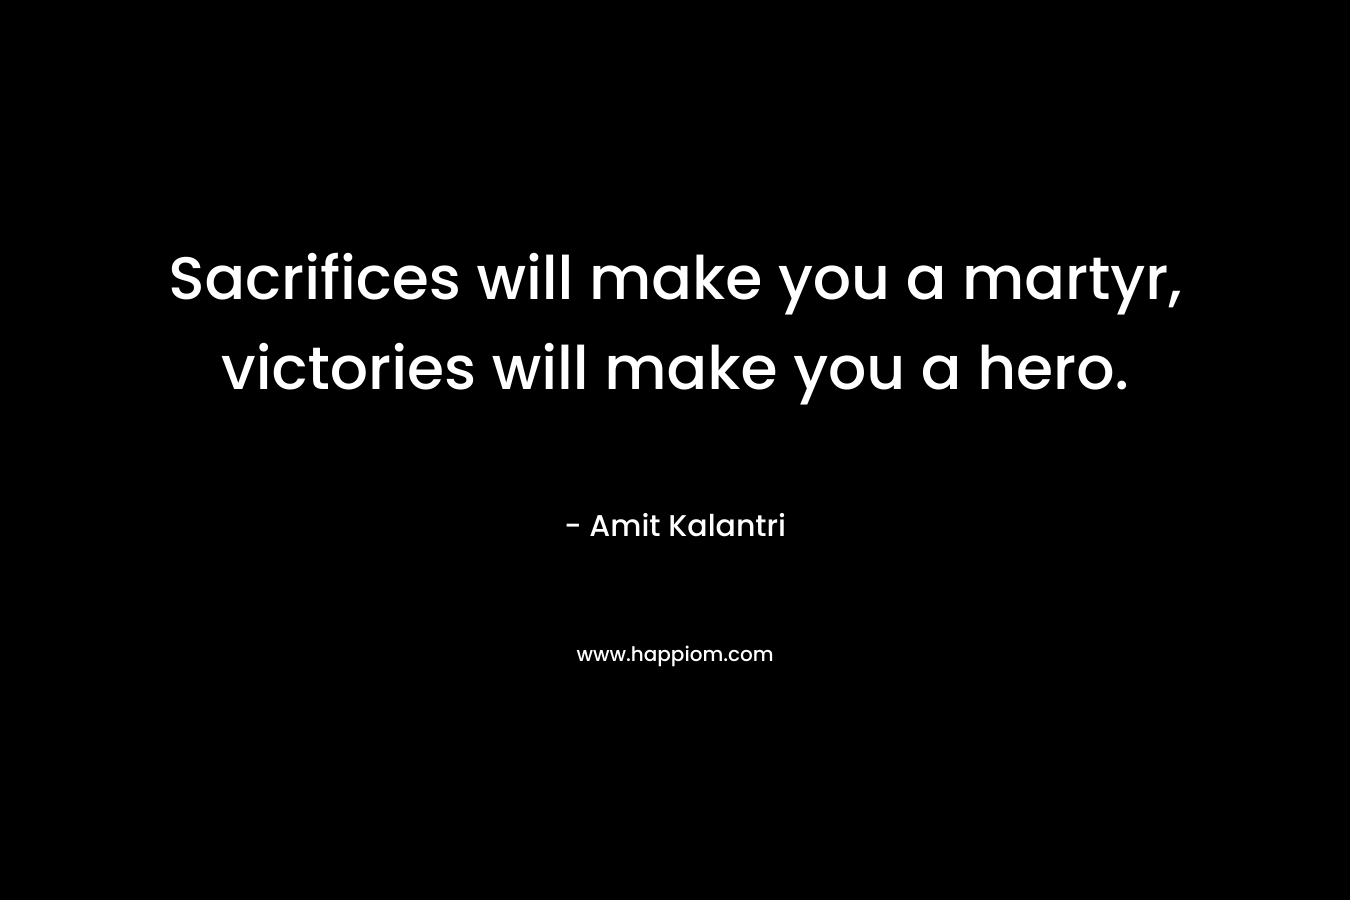 Sacrifices will make you a martyr, victories will make you a hero. – Amit Kalantri